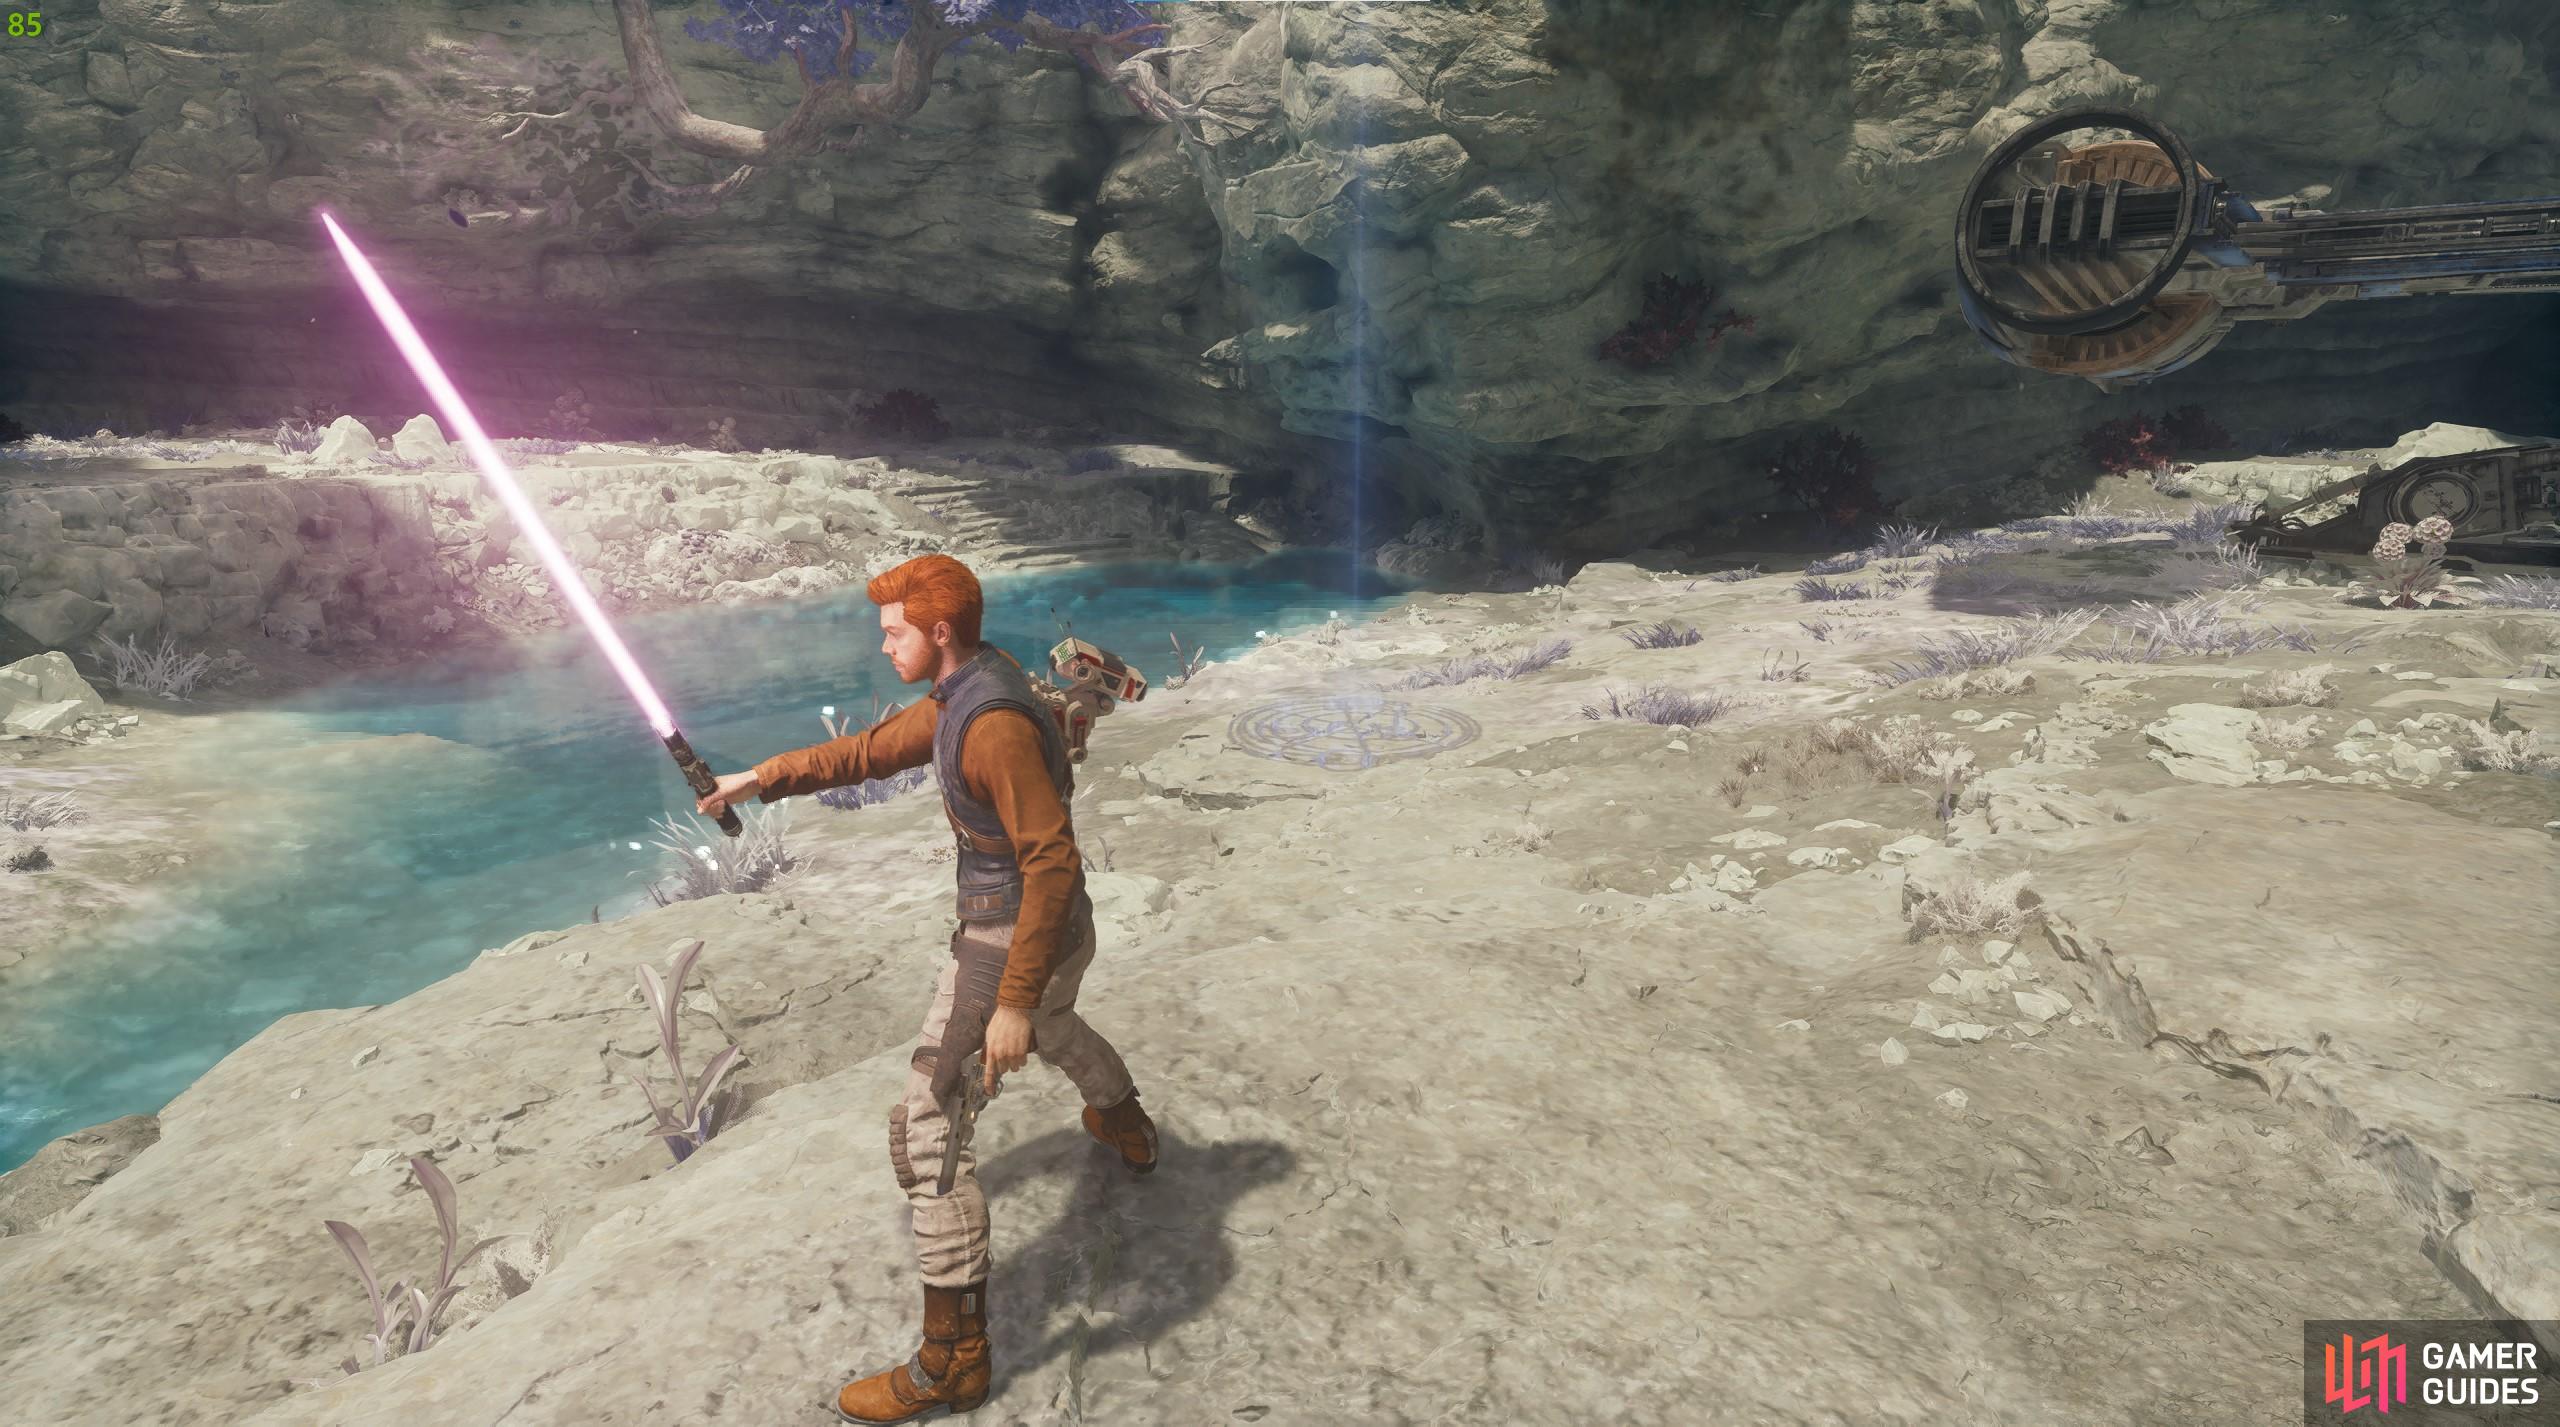 The Blaster combines a mixture of swash-buckling lightsaber action with the trickery of the Blaster, granting an interesting hybrid playstyle.